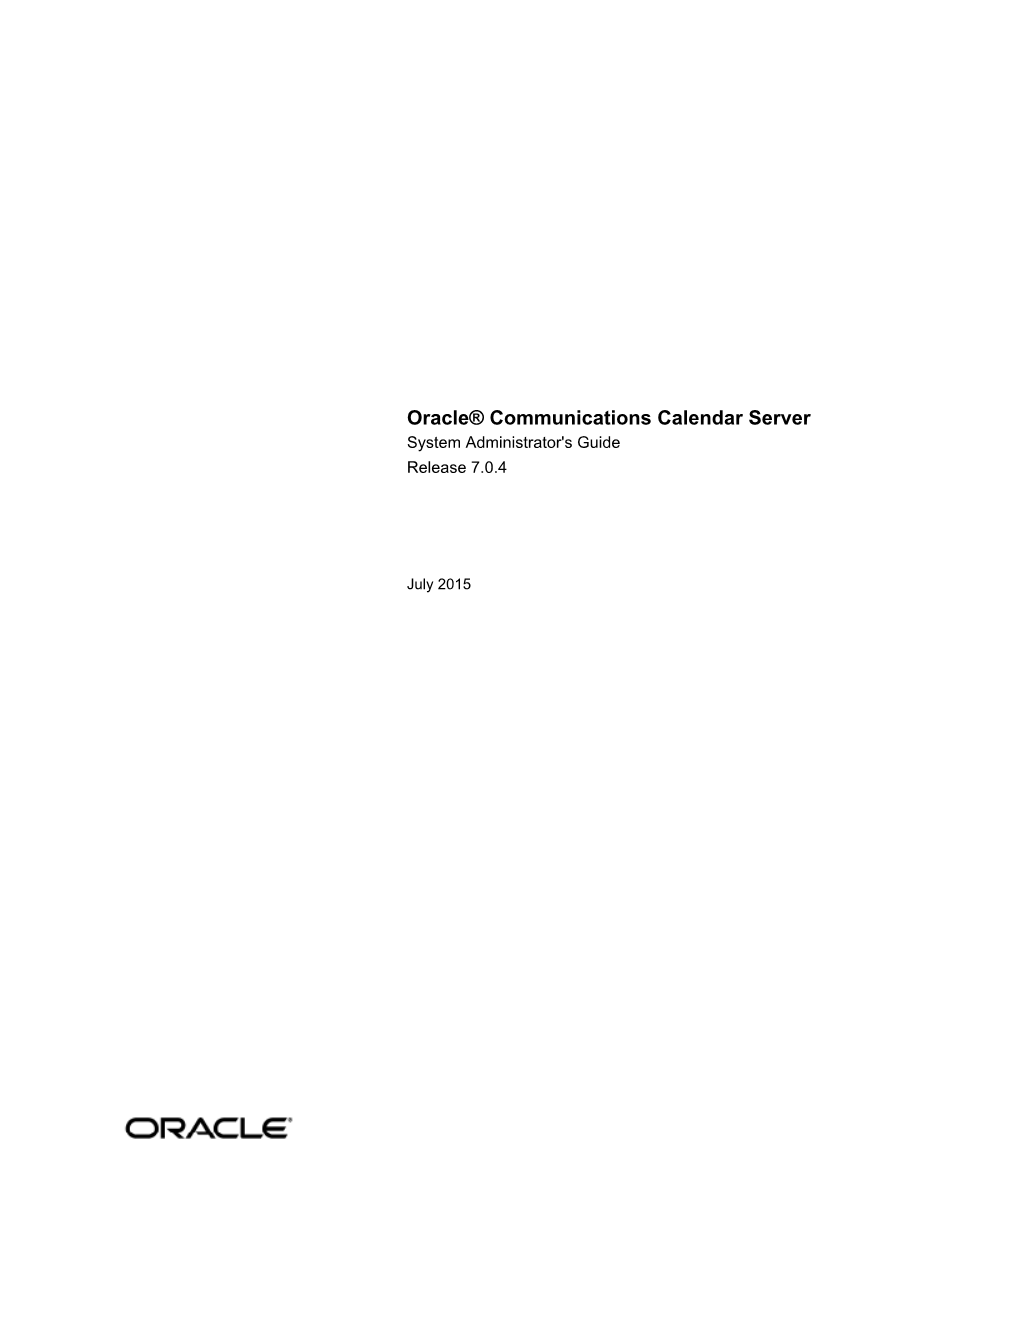 Oracle Communications Calendar Server System Administrator's Guide, Release 7.0.4